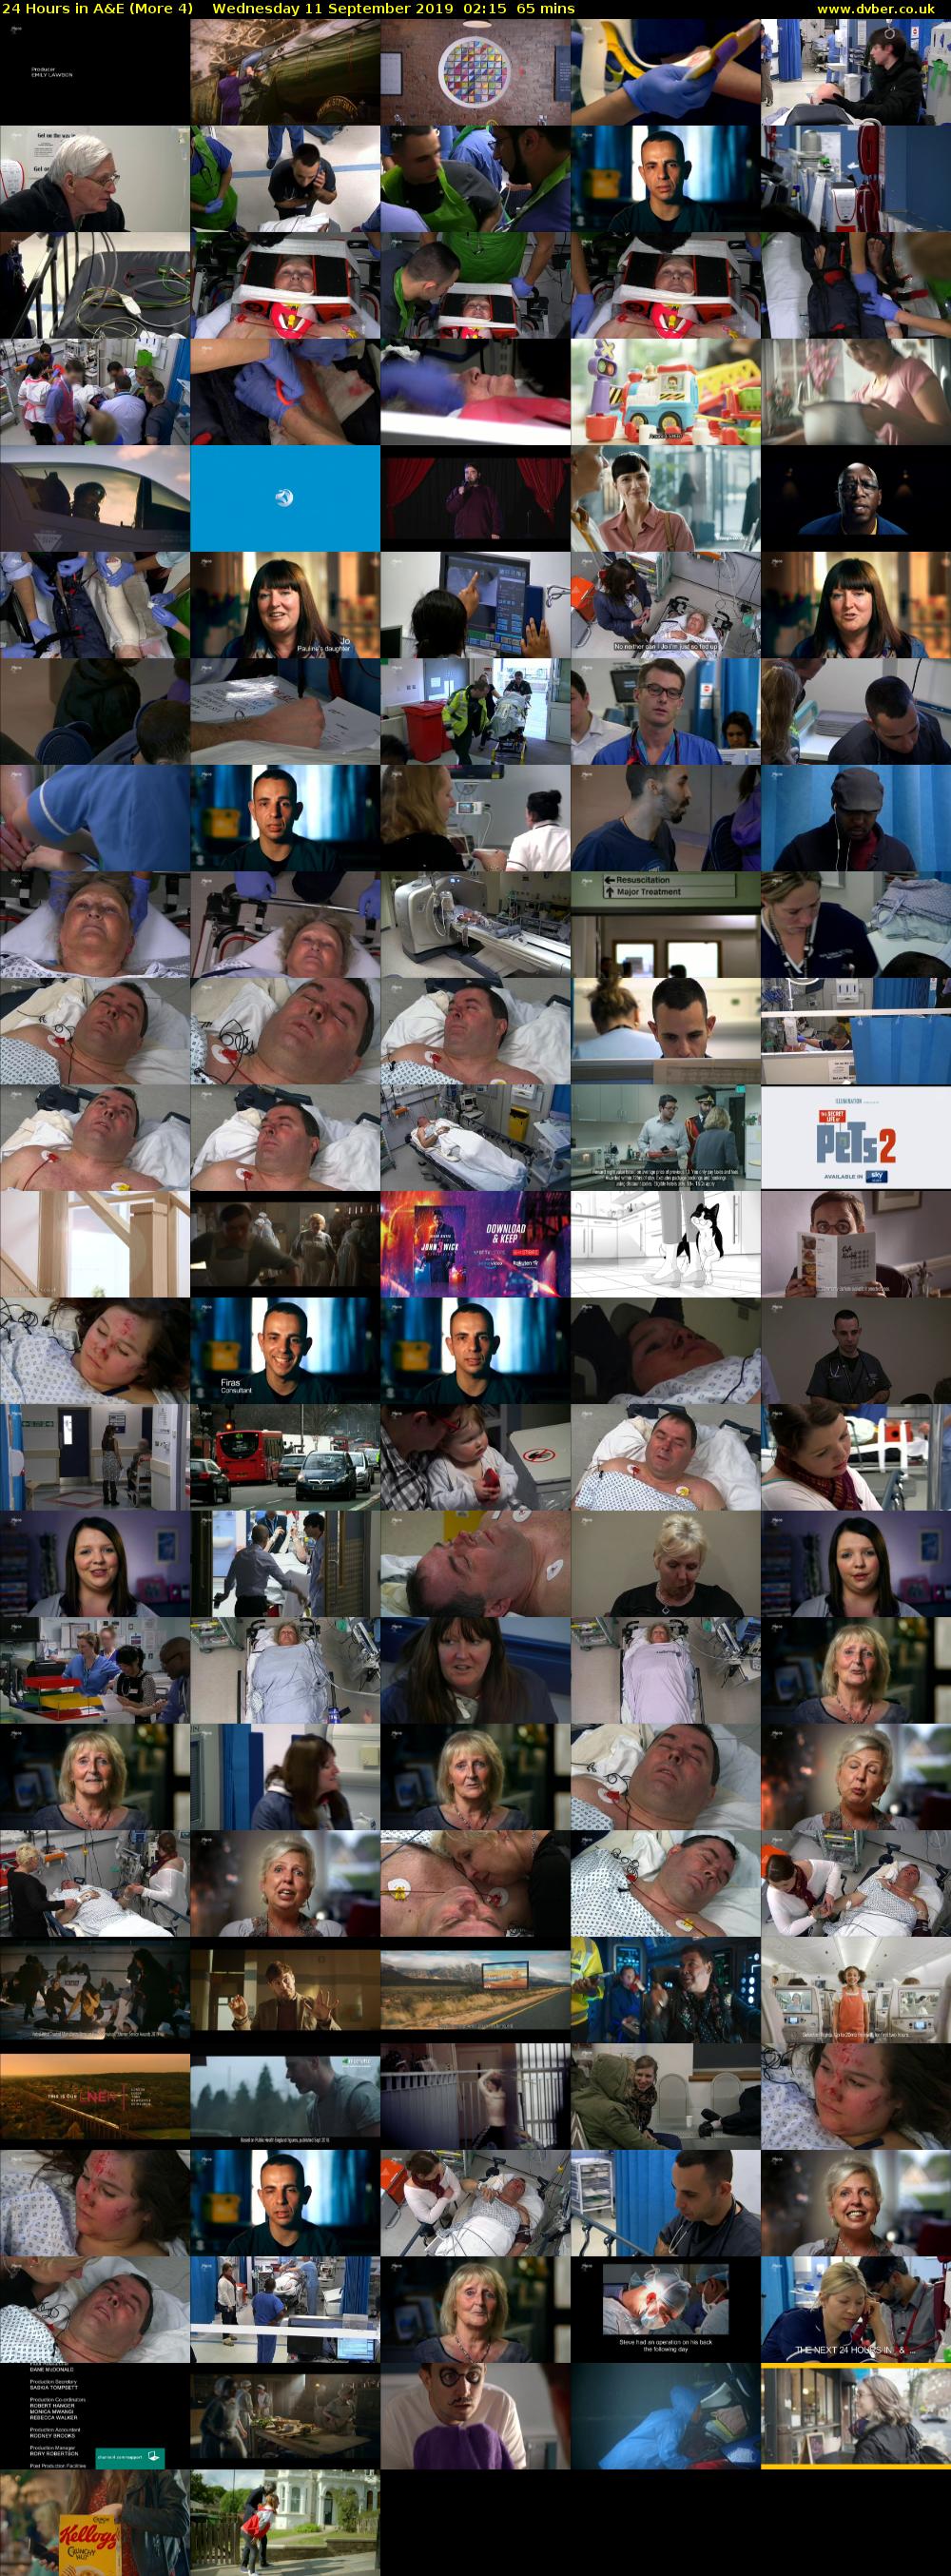 24 Hours in A&E (More 4) Wednesday 11 September 2019 02:15 - 03:20